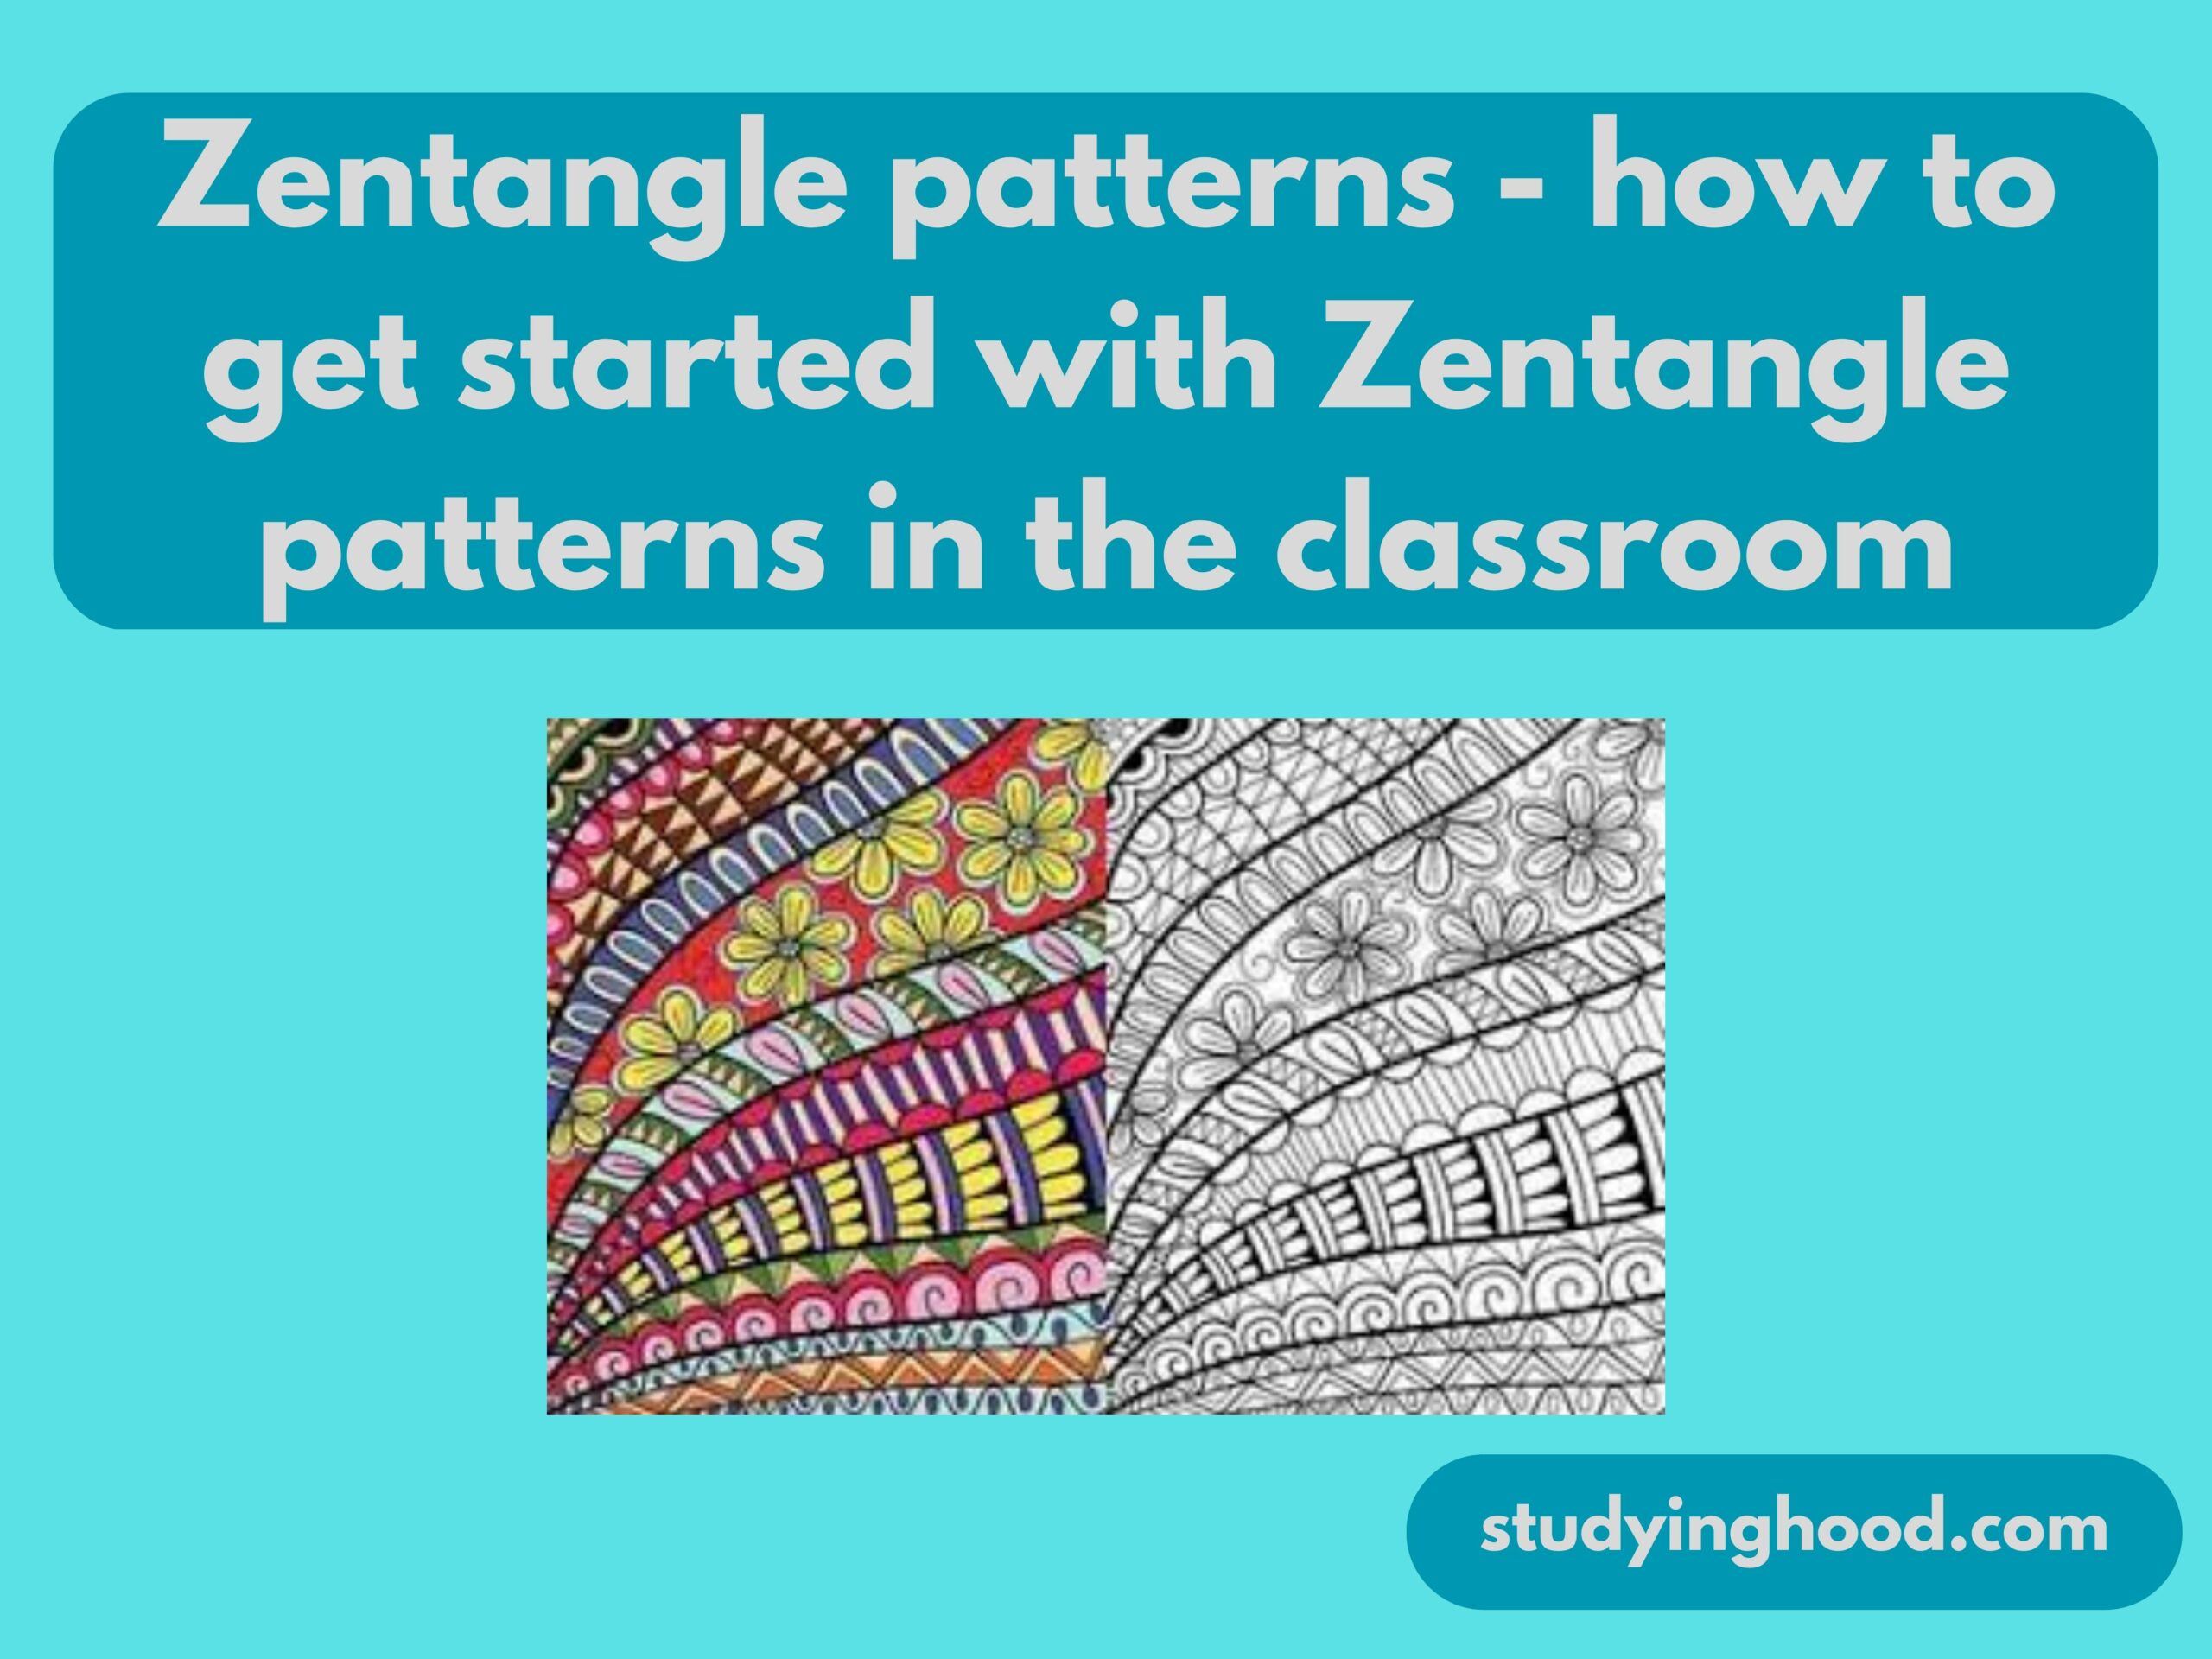 Zentangle patterns - how to get started with Zentangle patterns in the classroom